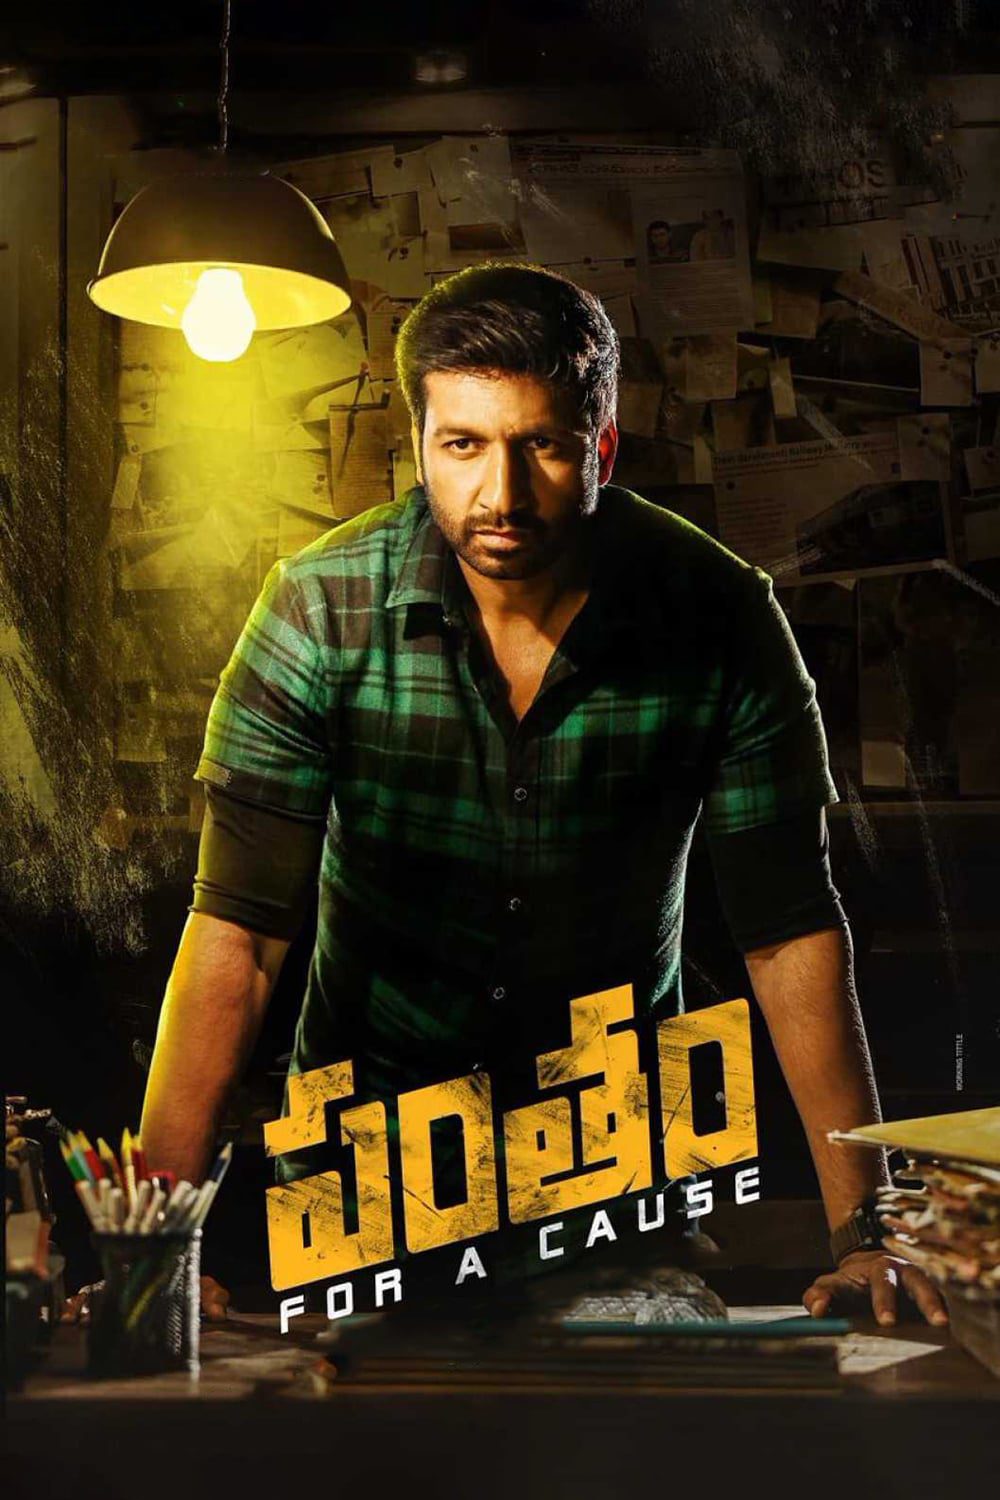 Poster for the movie "Pantham"